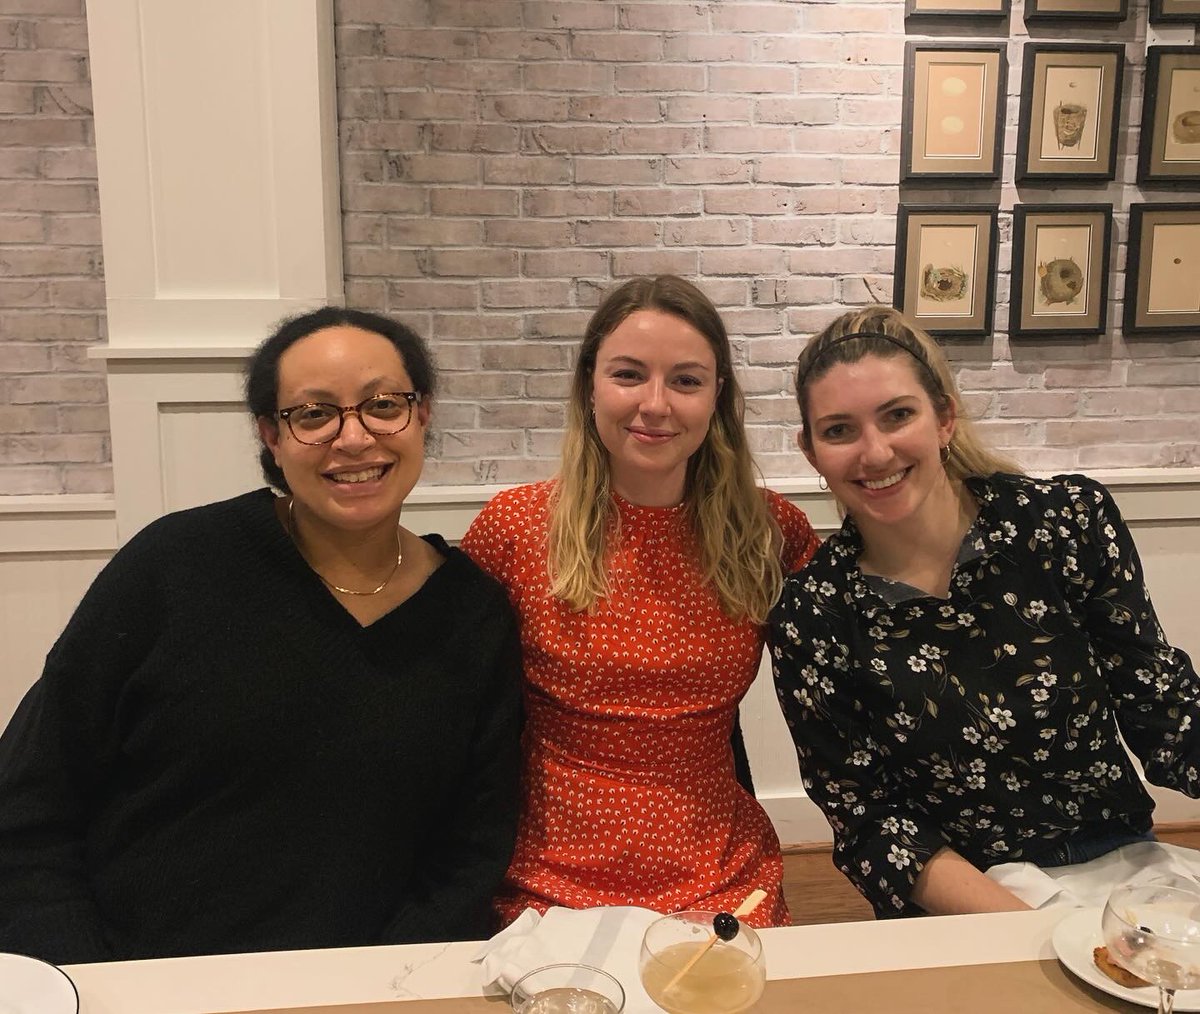 Last night we had our second annual women in neurosurgery dinner for regional med students where we gathered over a meal to talk about the joys & challenges of a career in neurosurgery

Thank you to the residents and faculty who came out! @Dukeneurosurg #WomeninNeurosurgery #WINS